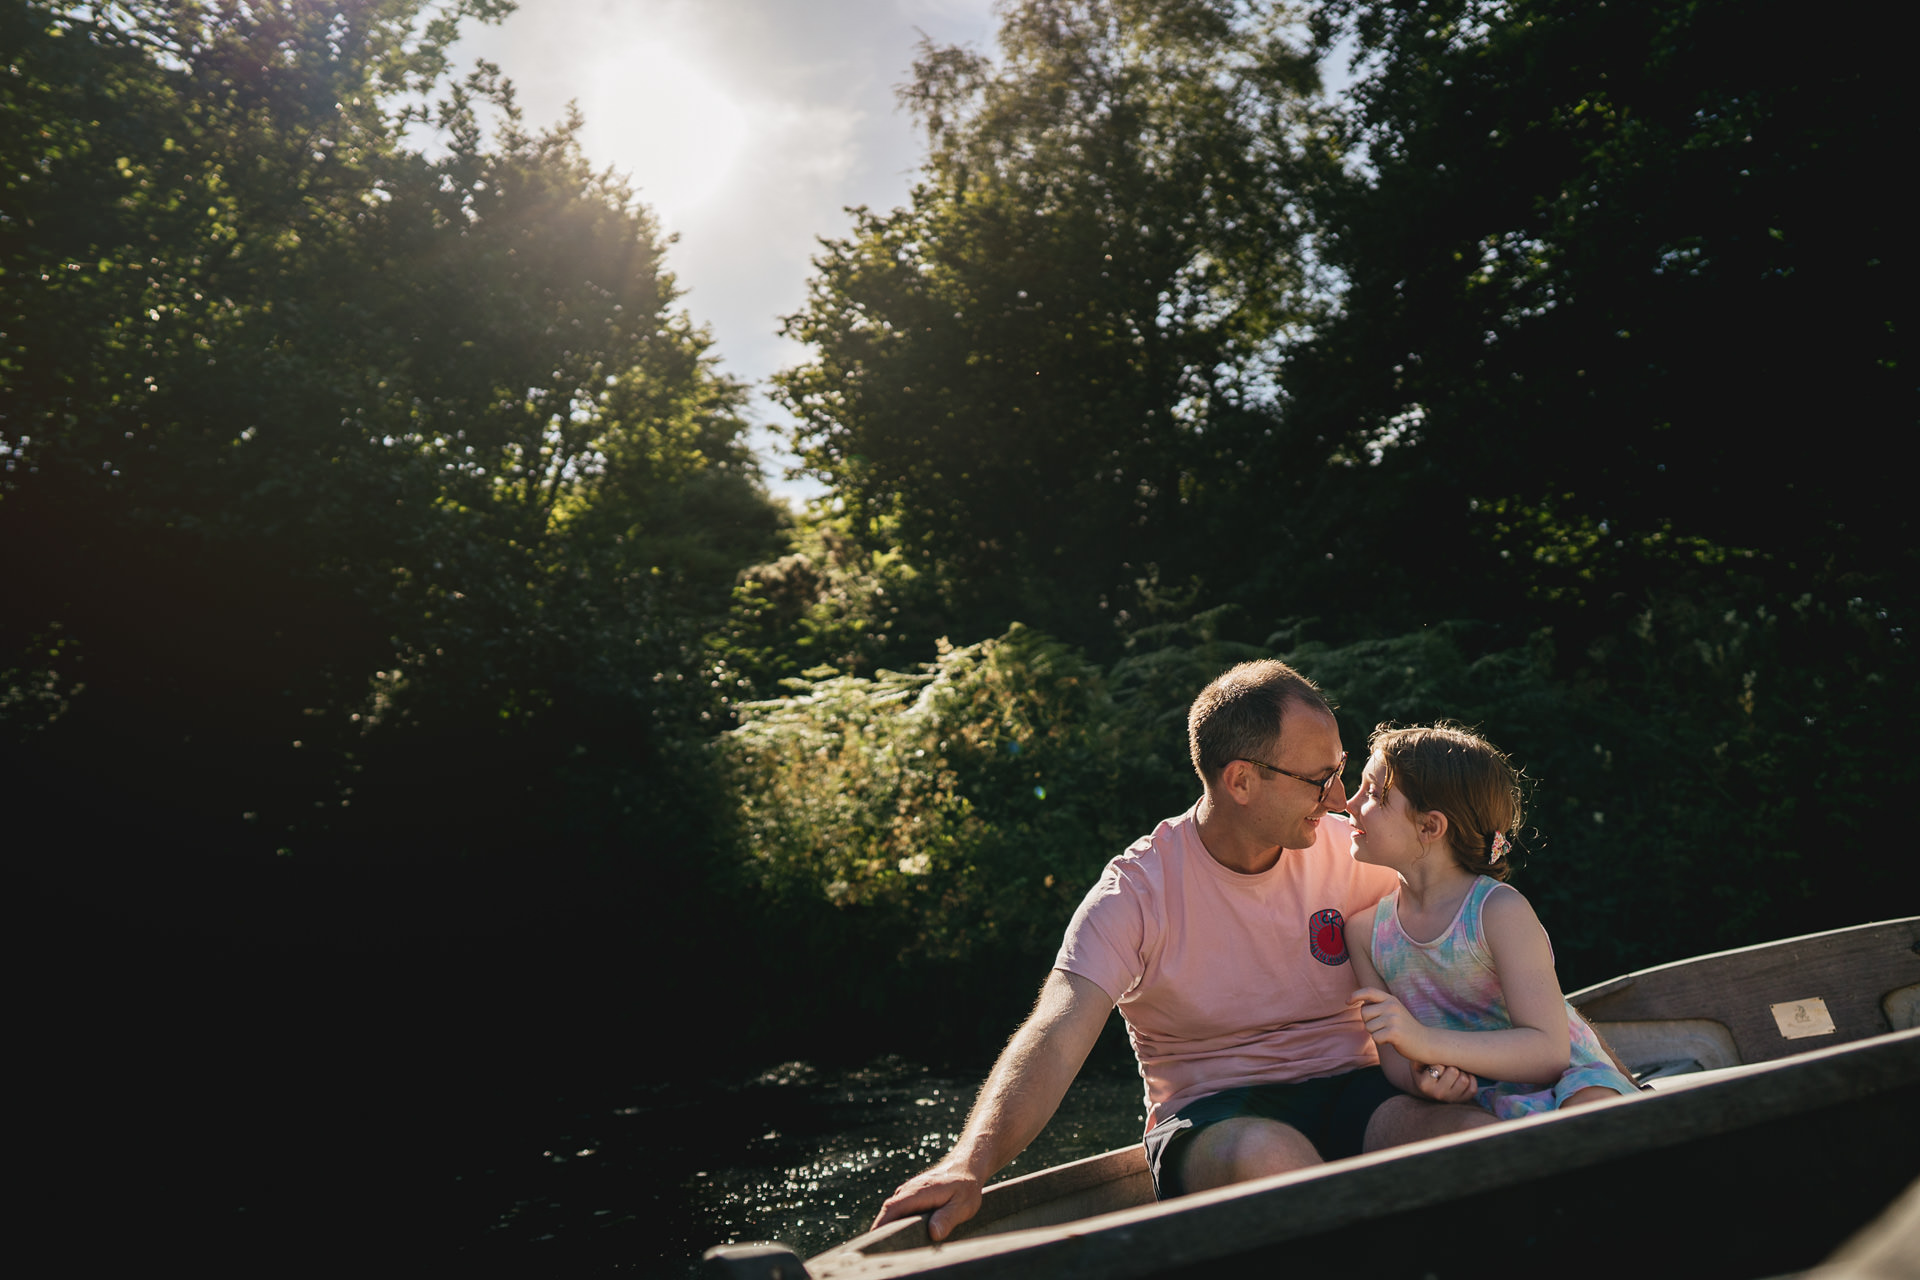 A father and daughter sitting in a small boat together in the sunshine, smiling at each other and touching noses